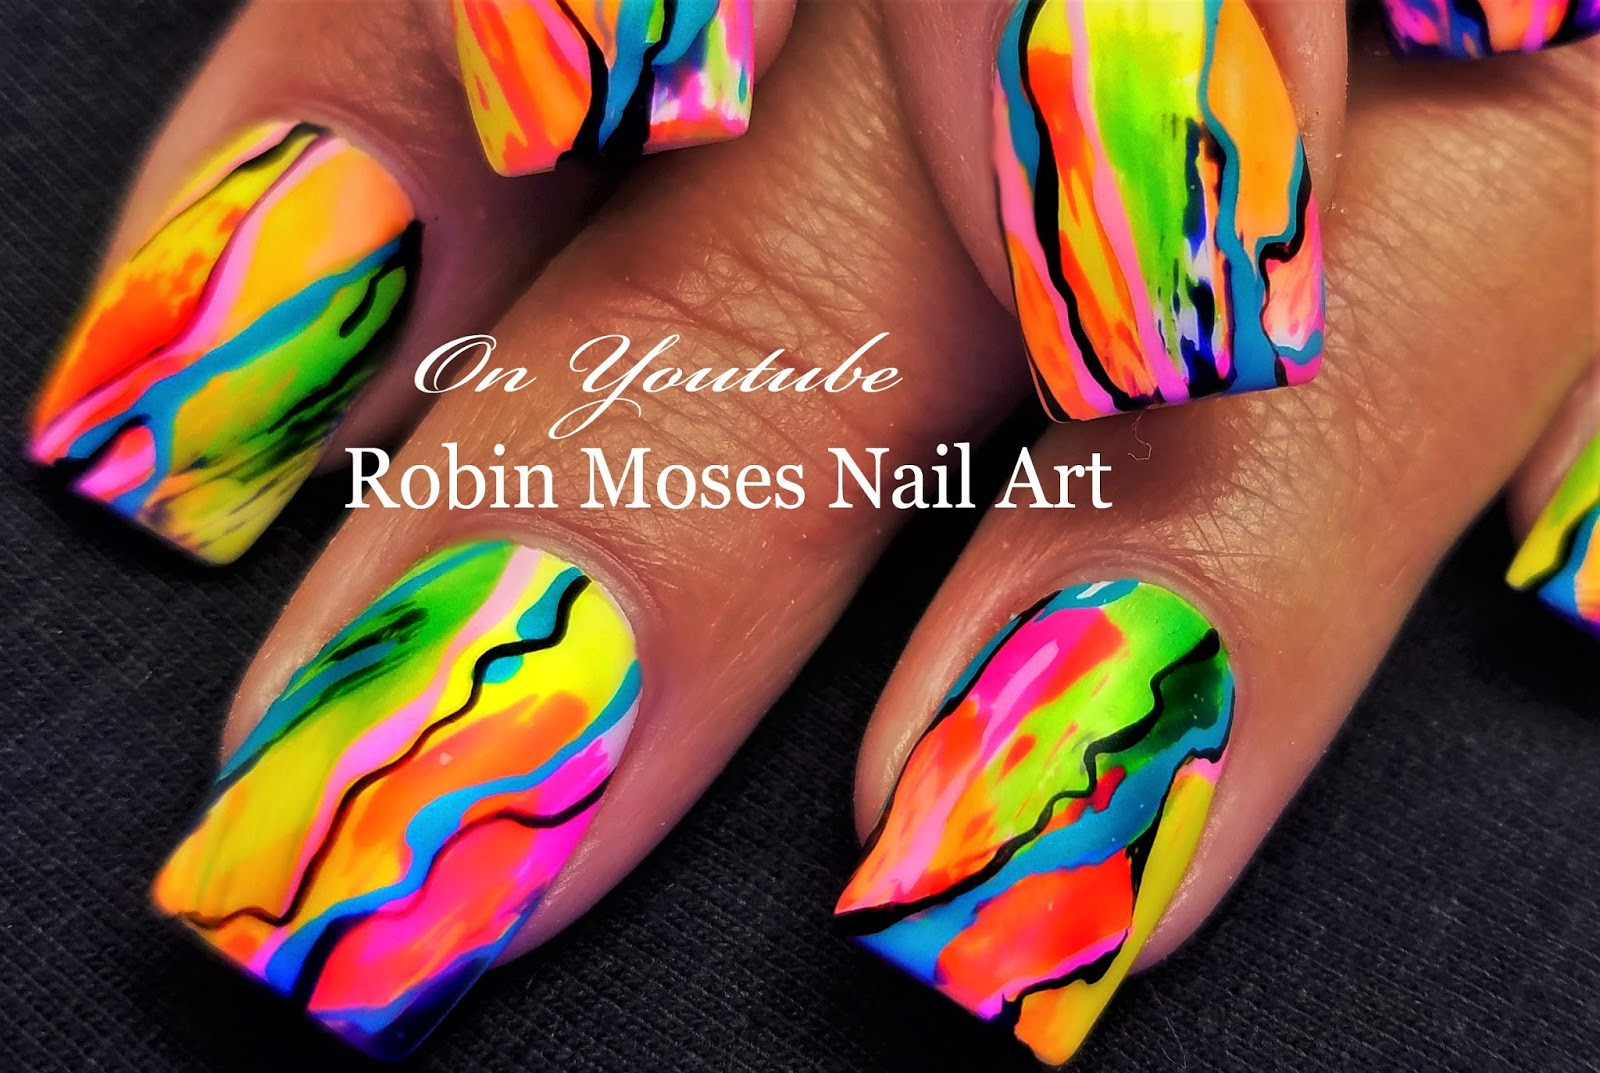 Robin Moses Nail Art Brushes - Yahoo Search Results - wide 6